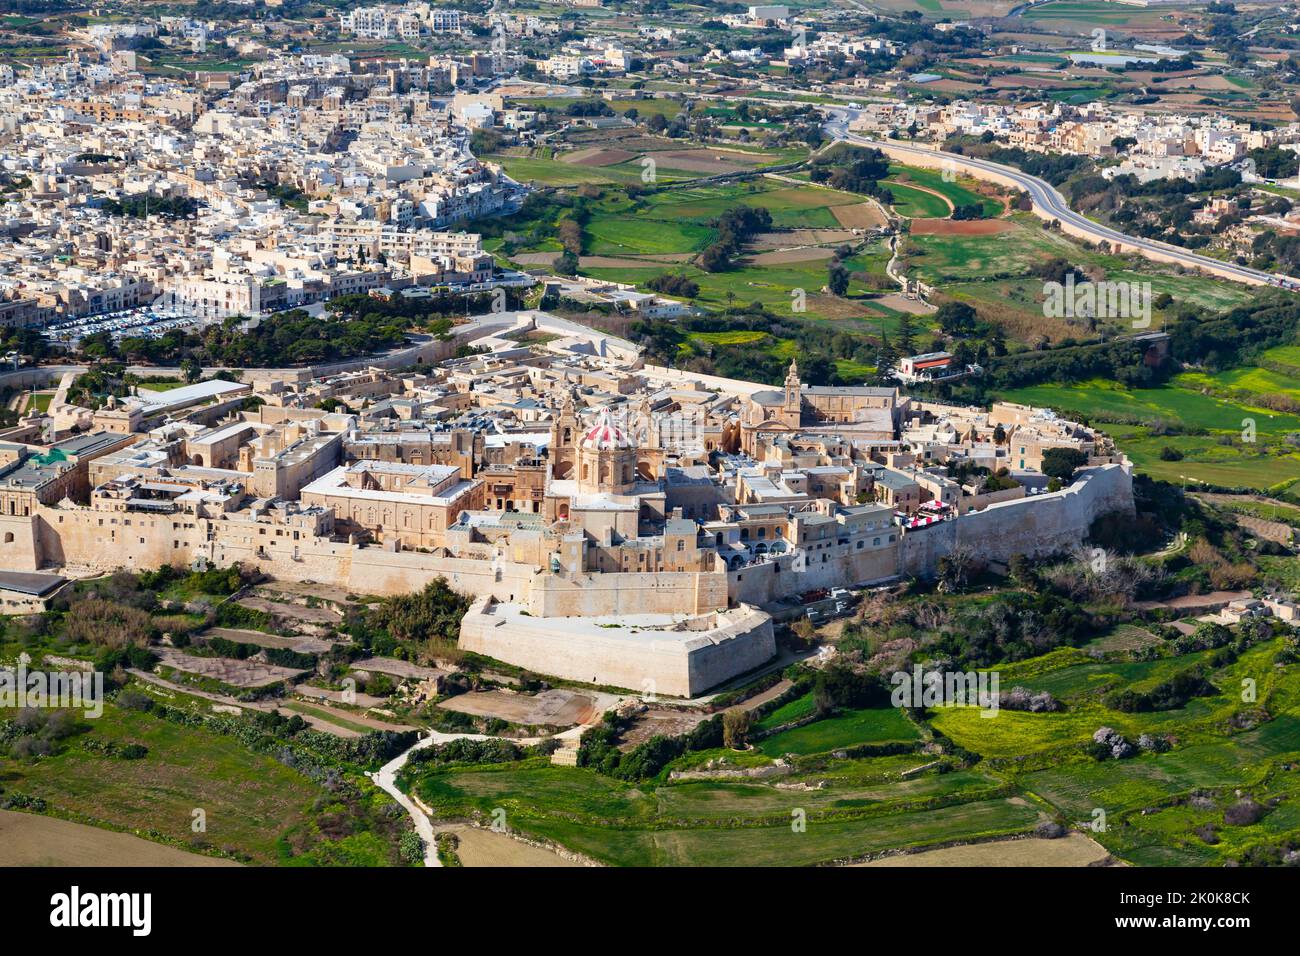 The walled town of Mdina, Malta as seen from above. Stock Photo